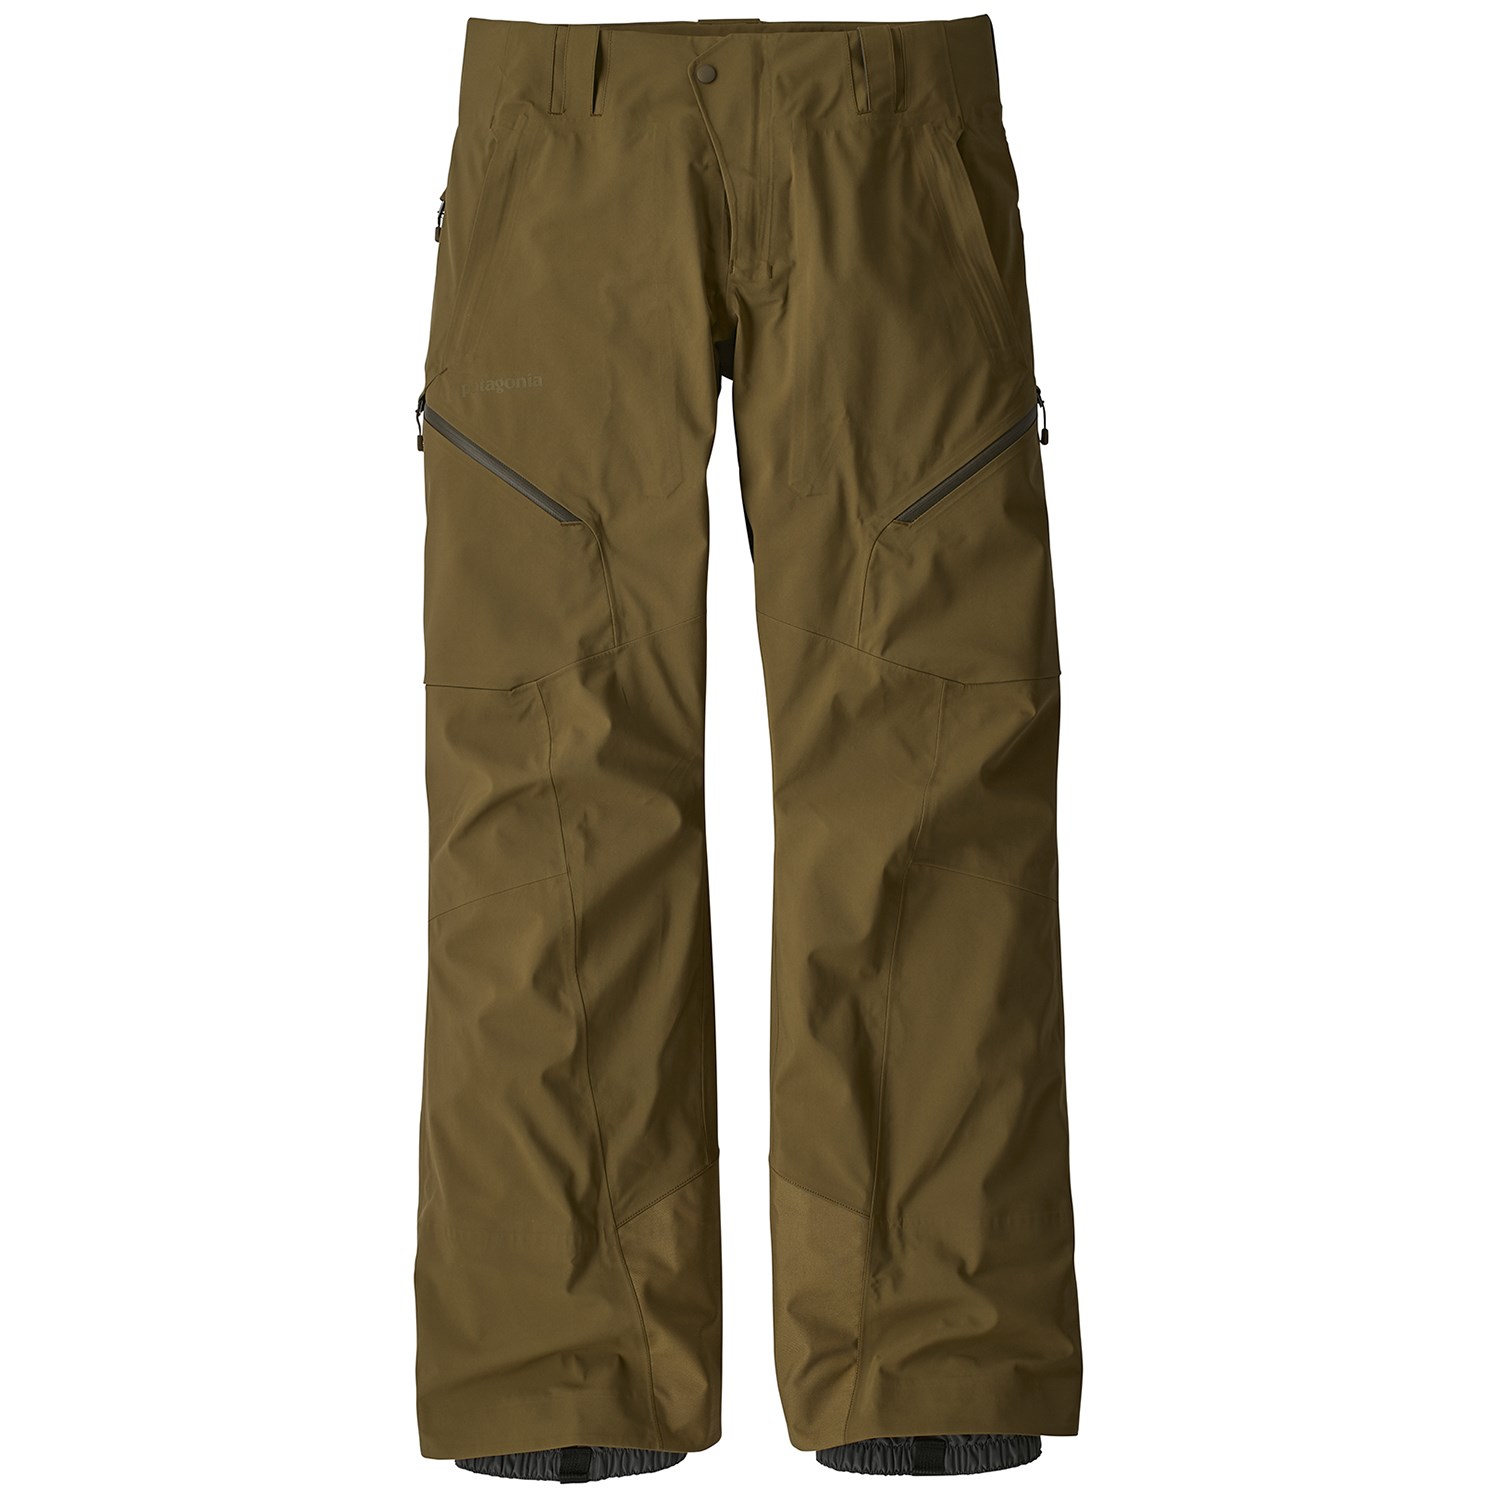 Patagonia Blue Active Pants Size XL - 67% off